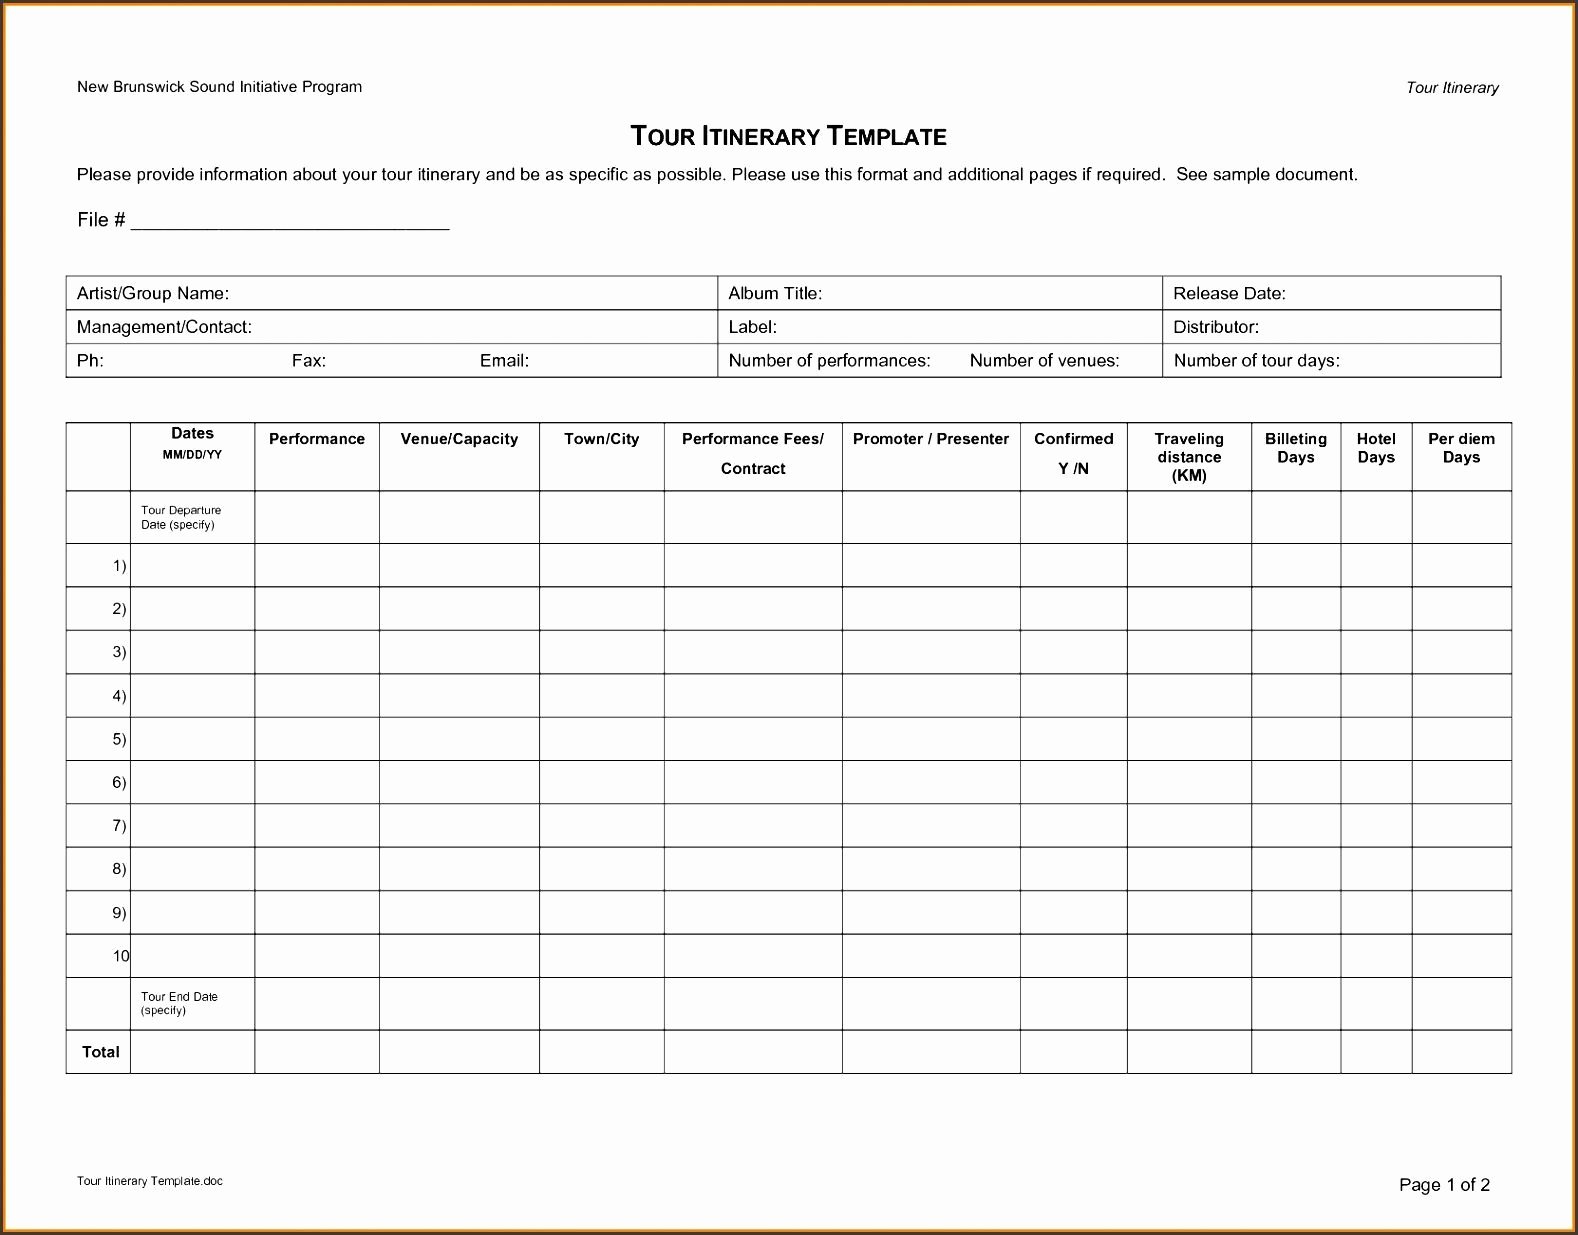 Travel Itinerary Template Word 2010 Fresh Travel Itinerary Template Excel Letter Examples 2007